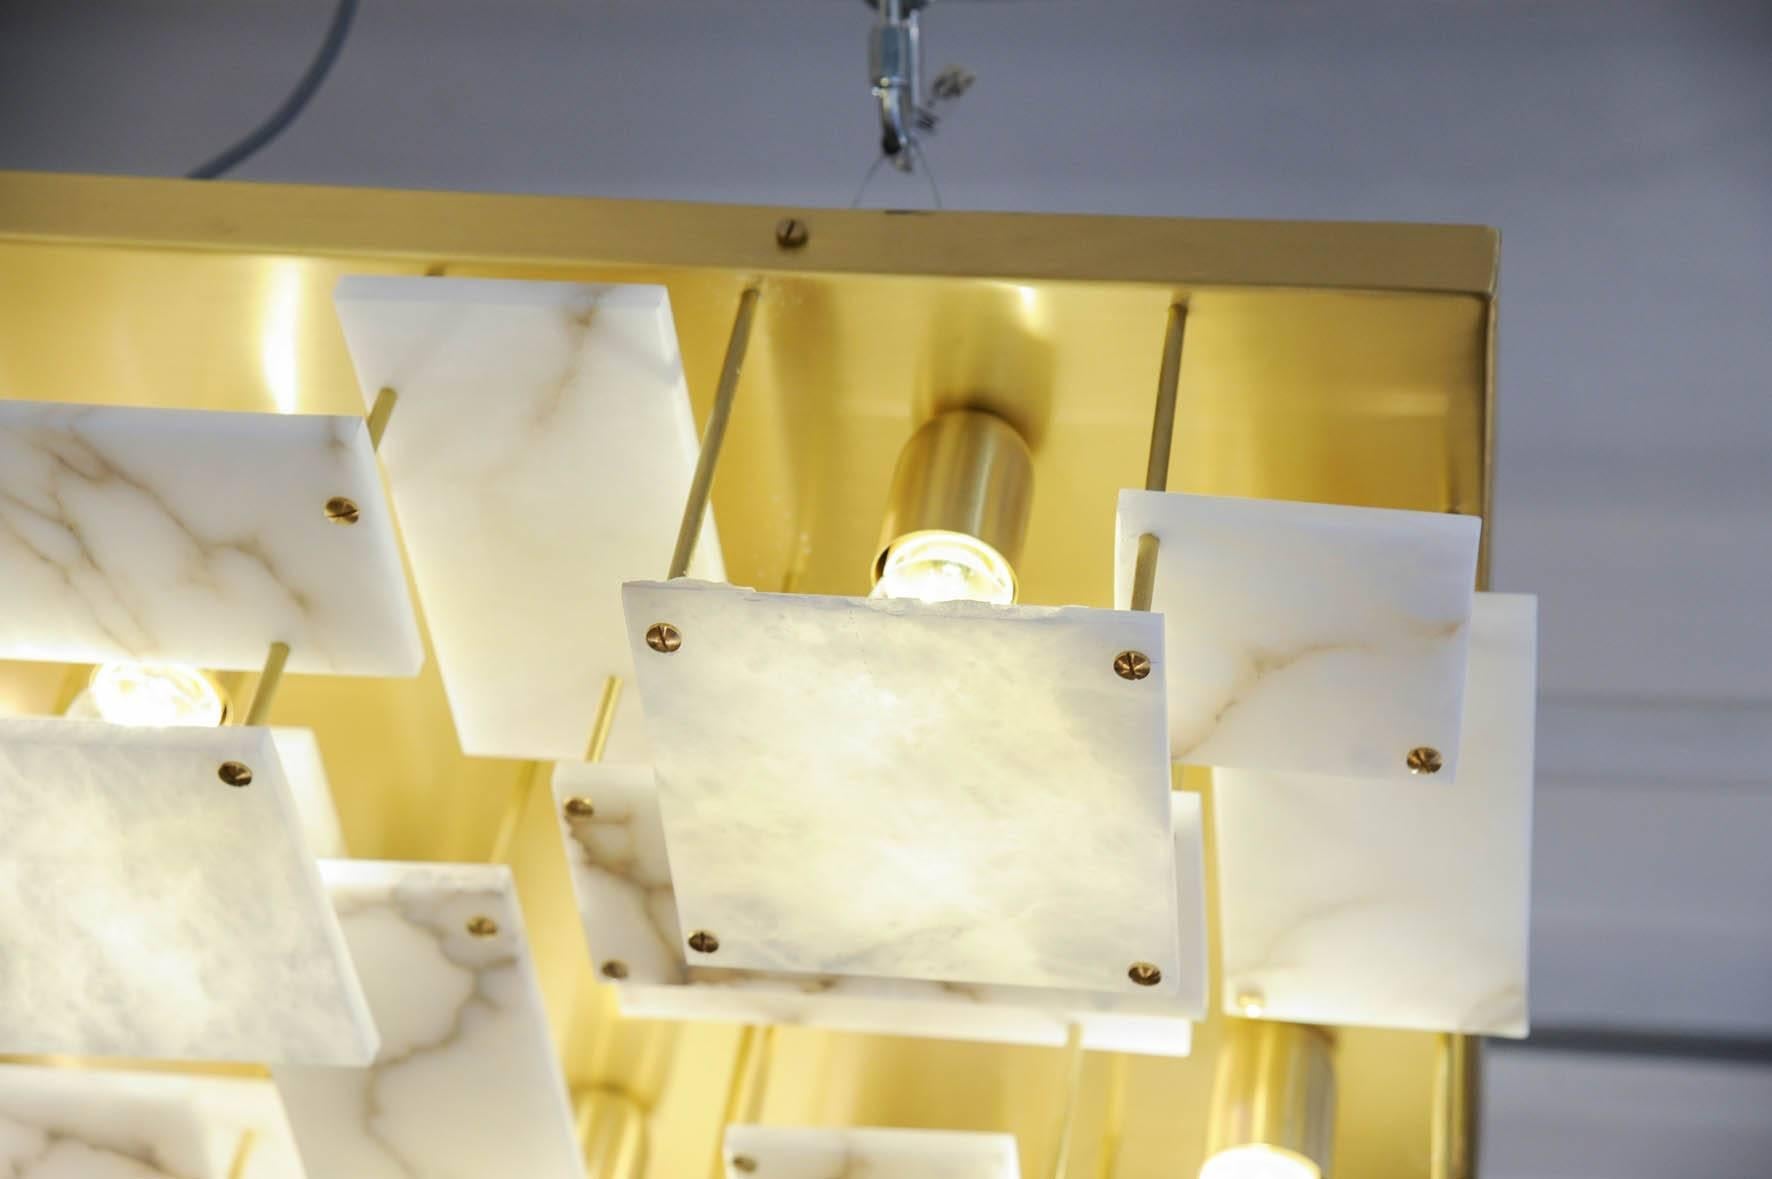 New design by Glustin Luminaires, ceiling lamp made of an aluminium structure, covered with a brass plate on which are disposed in superposition alabaster tiles.

Can also be placed on the wall for a great wall sconces.